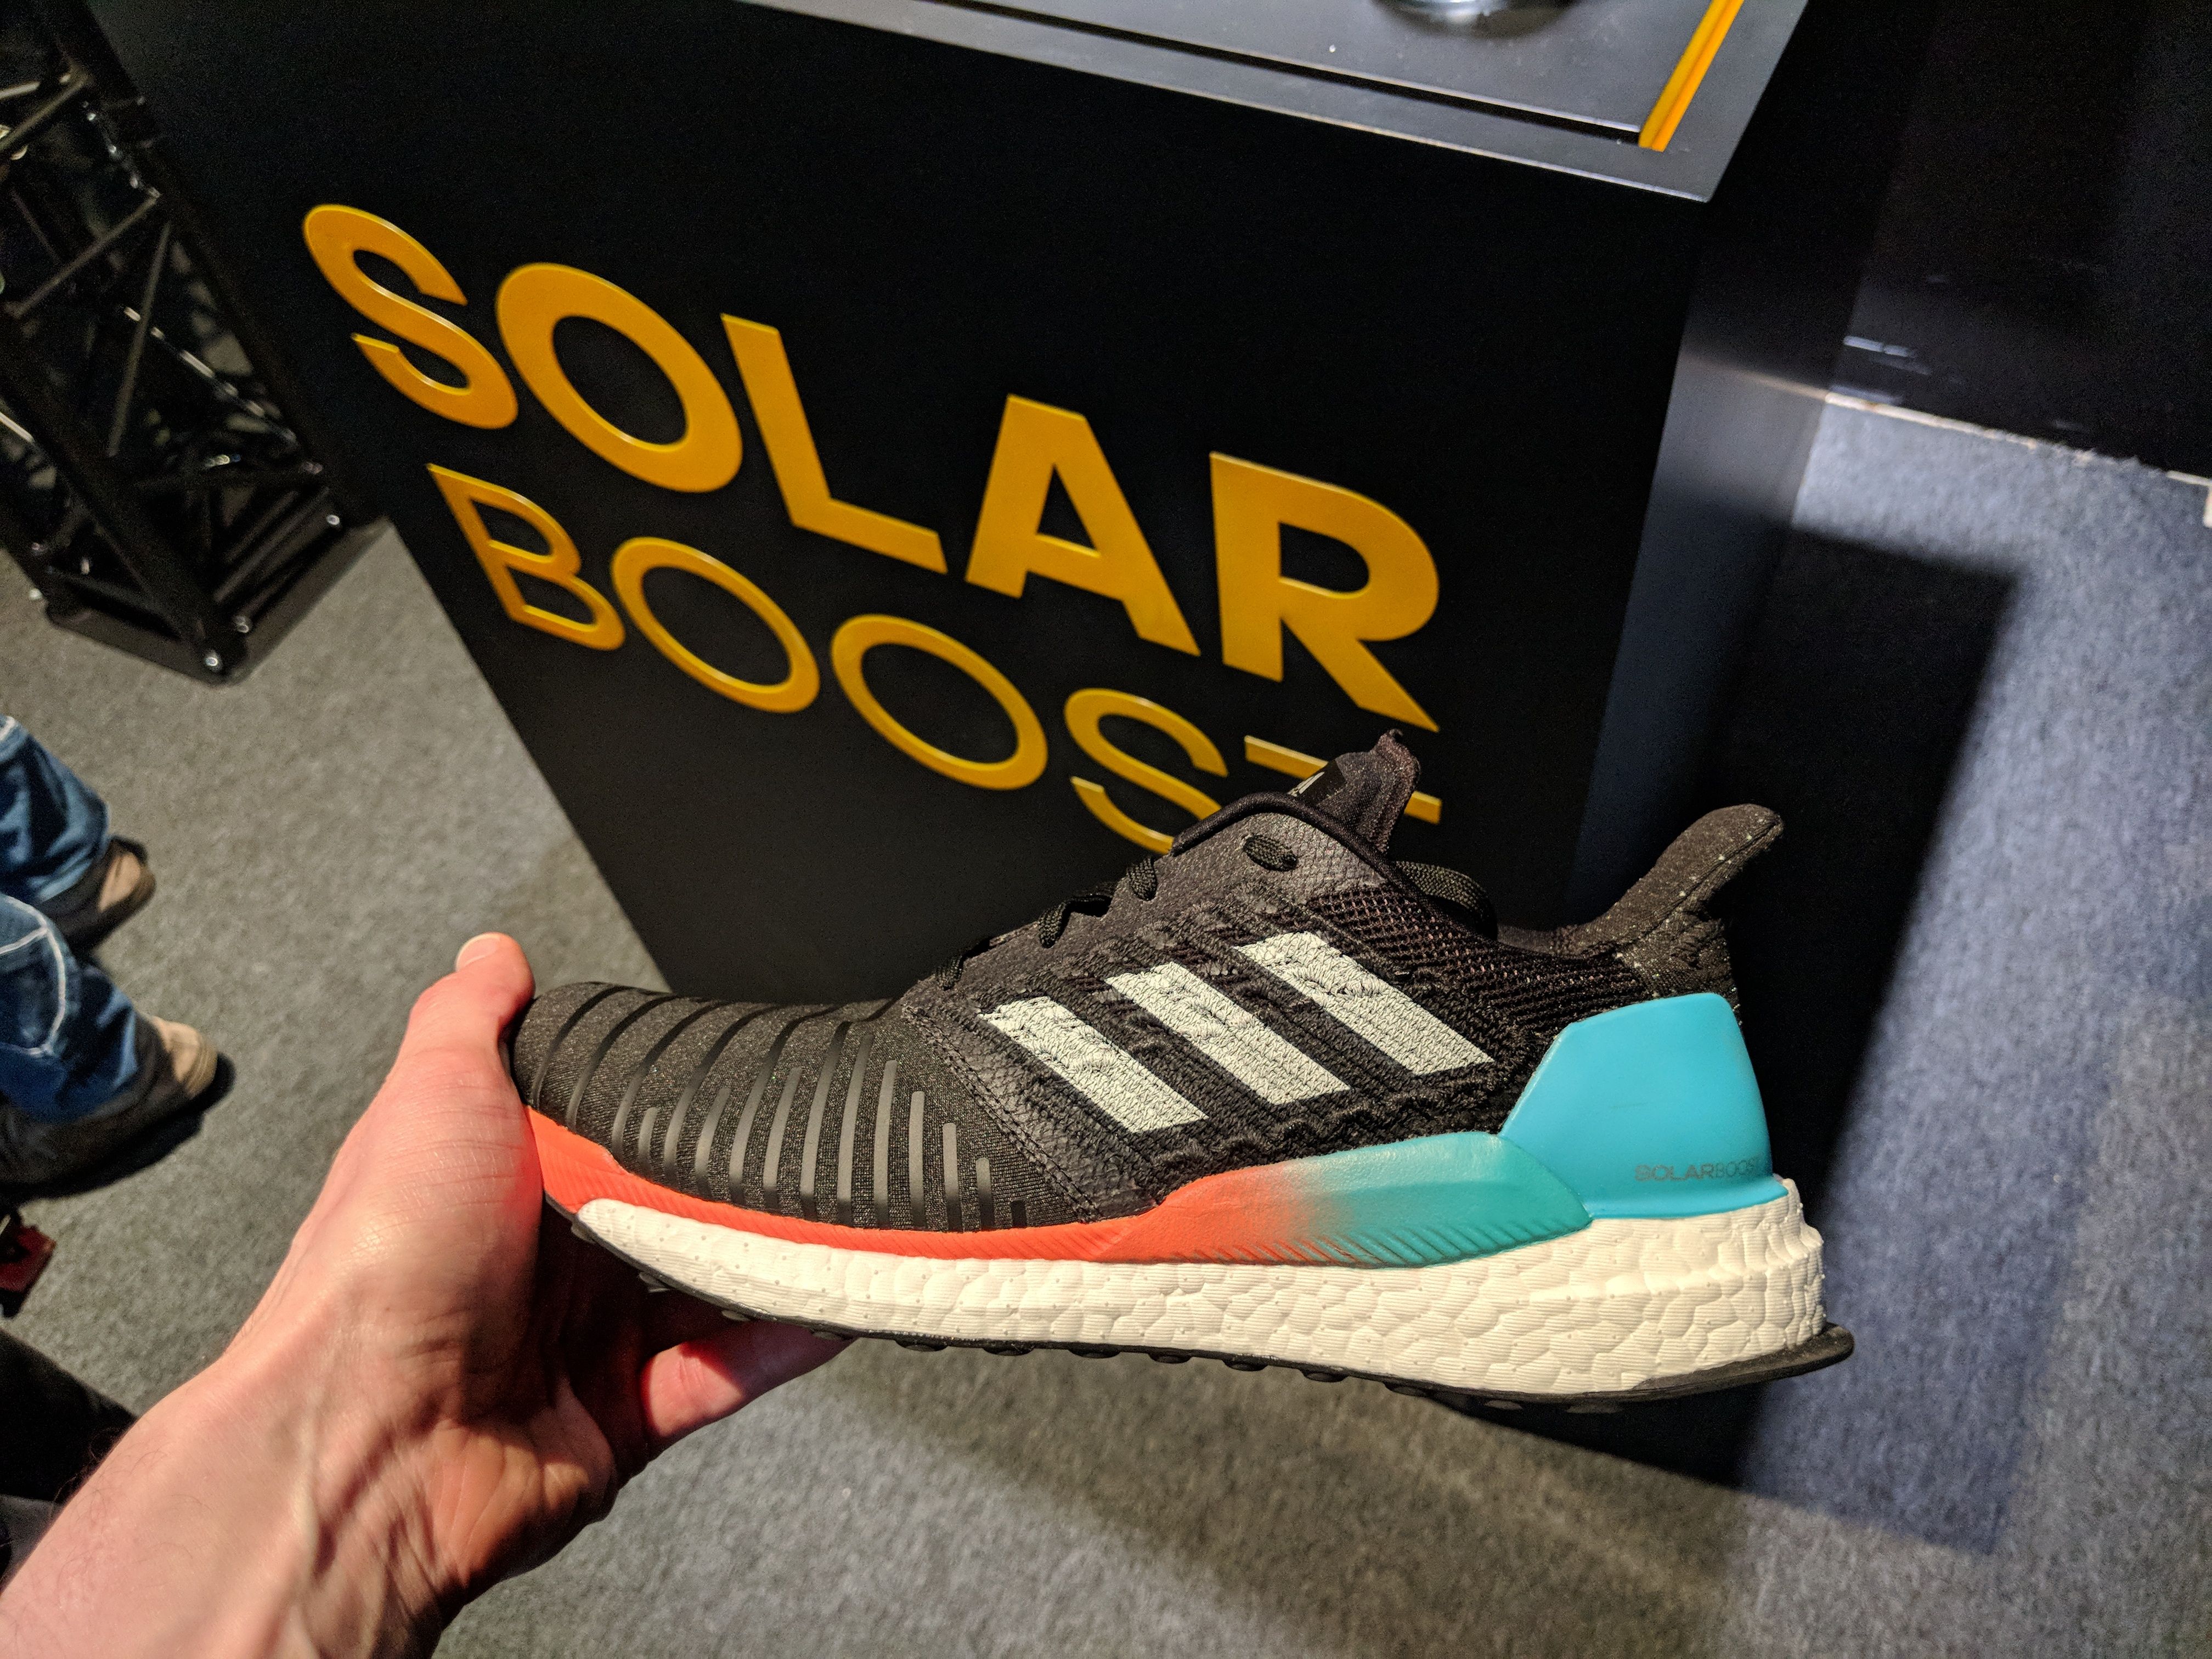 adidas SolarBOOST - we tested, ran in 